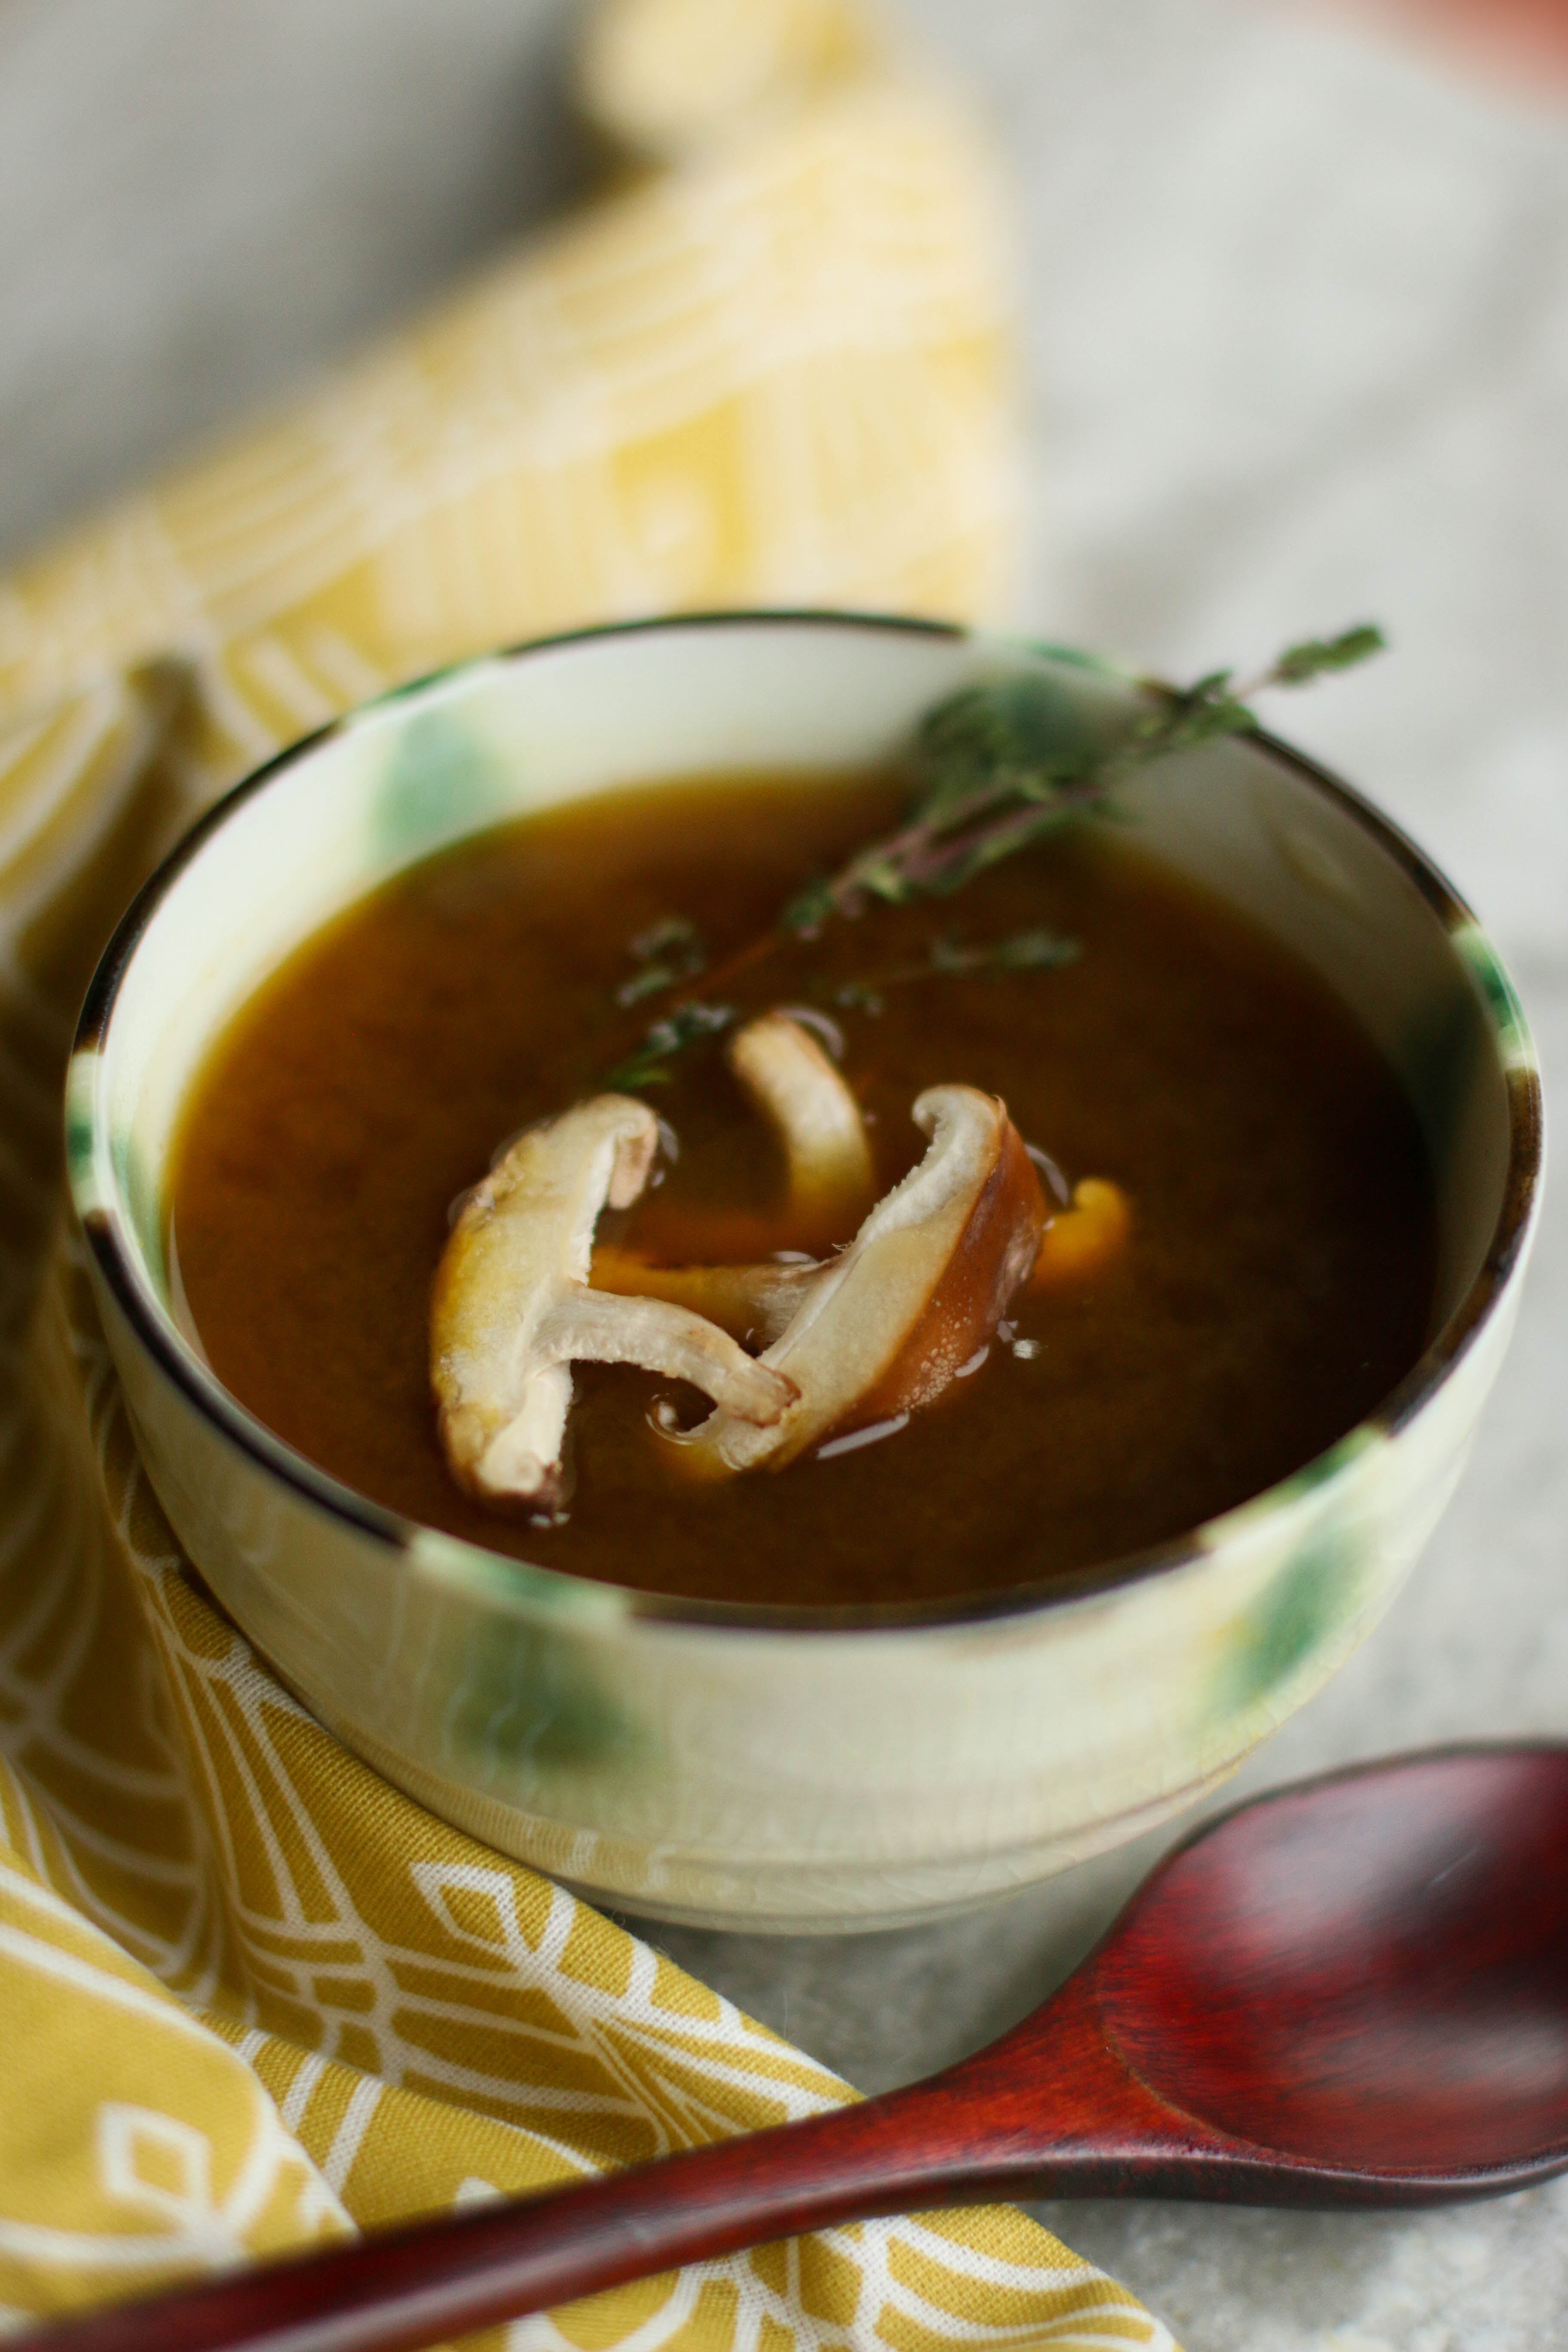 shiitake-mushrooms-and-thyme-in-broth-in-ceramic-bowl-with-wooden-spoon